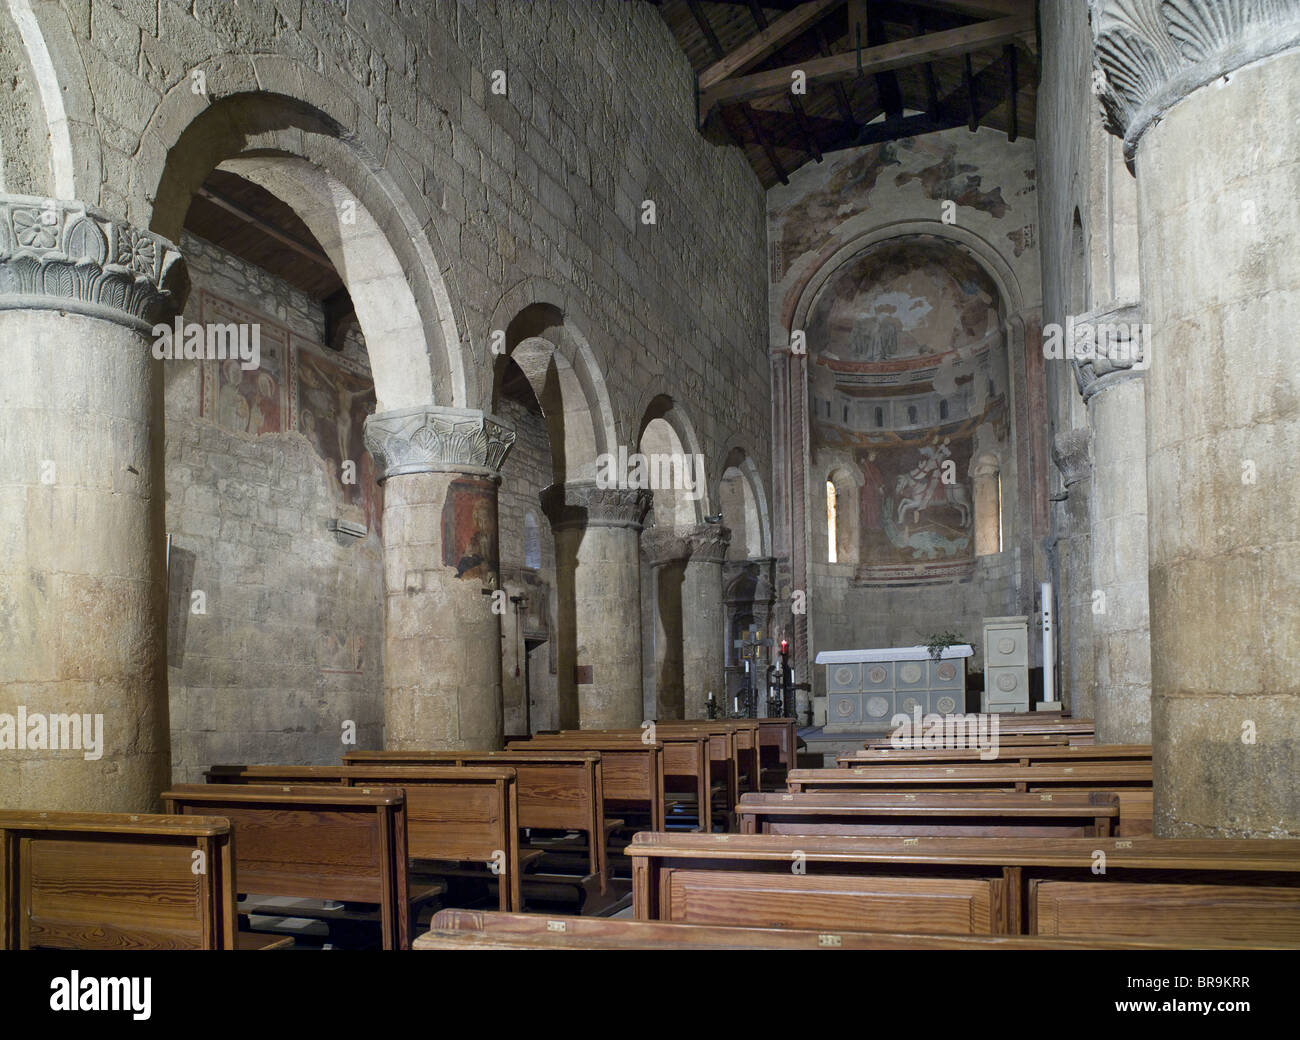 Vigoleno,  Italy. 12th century Church of San Giorgio. Interior nave and apse, with Romanesque columns and round headed arches. Stock Photo